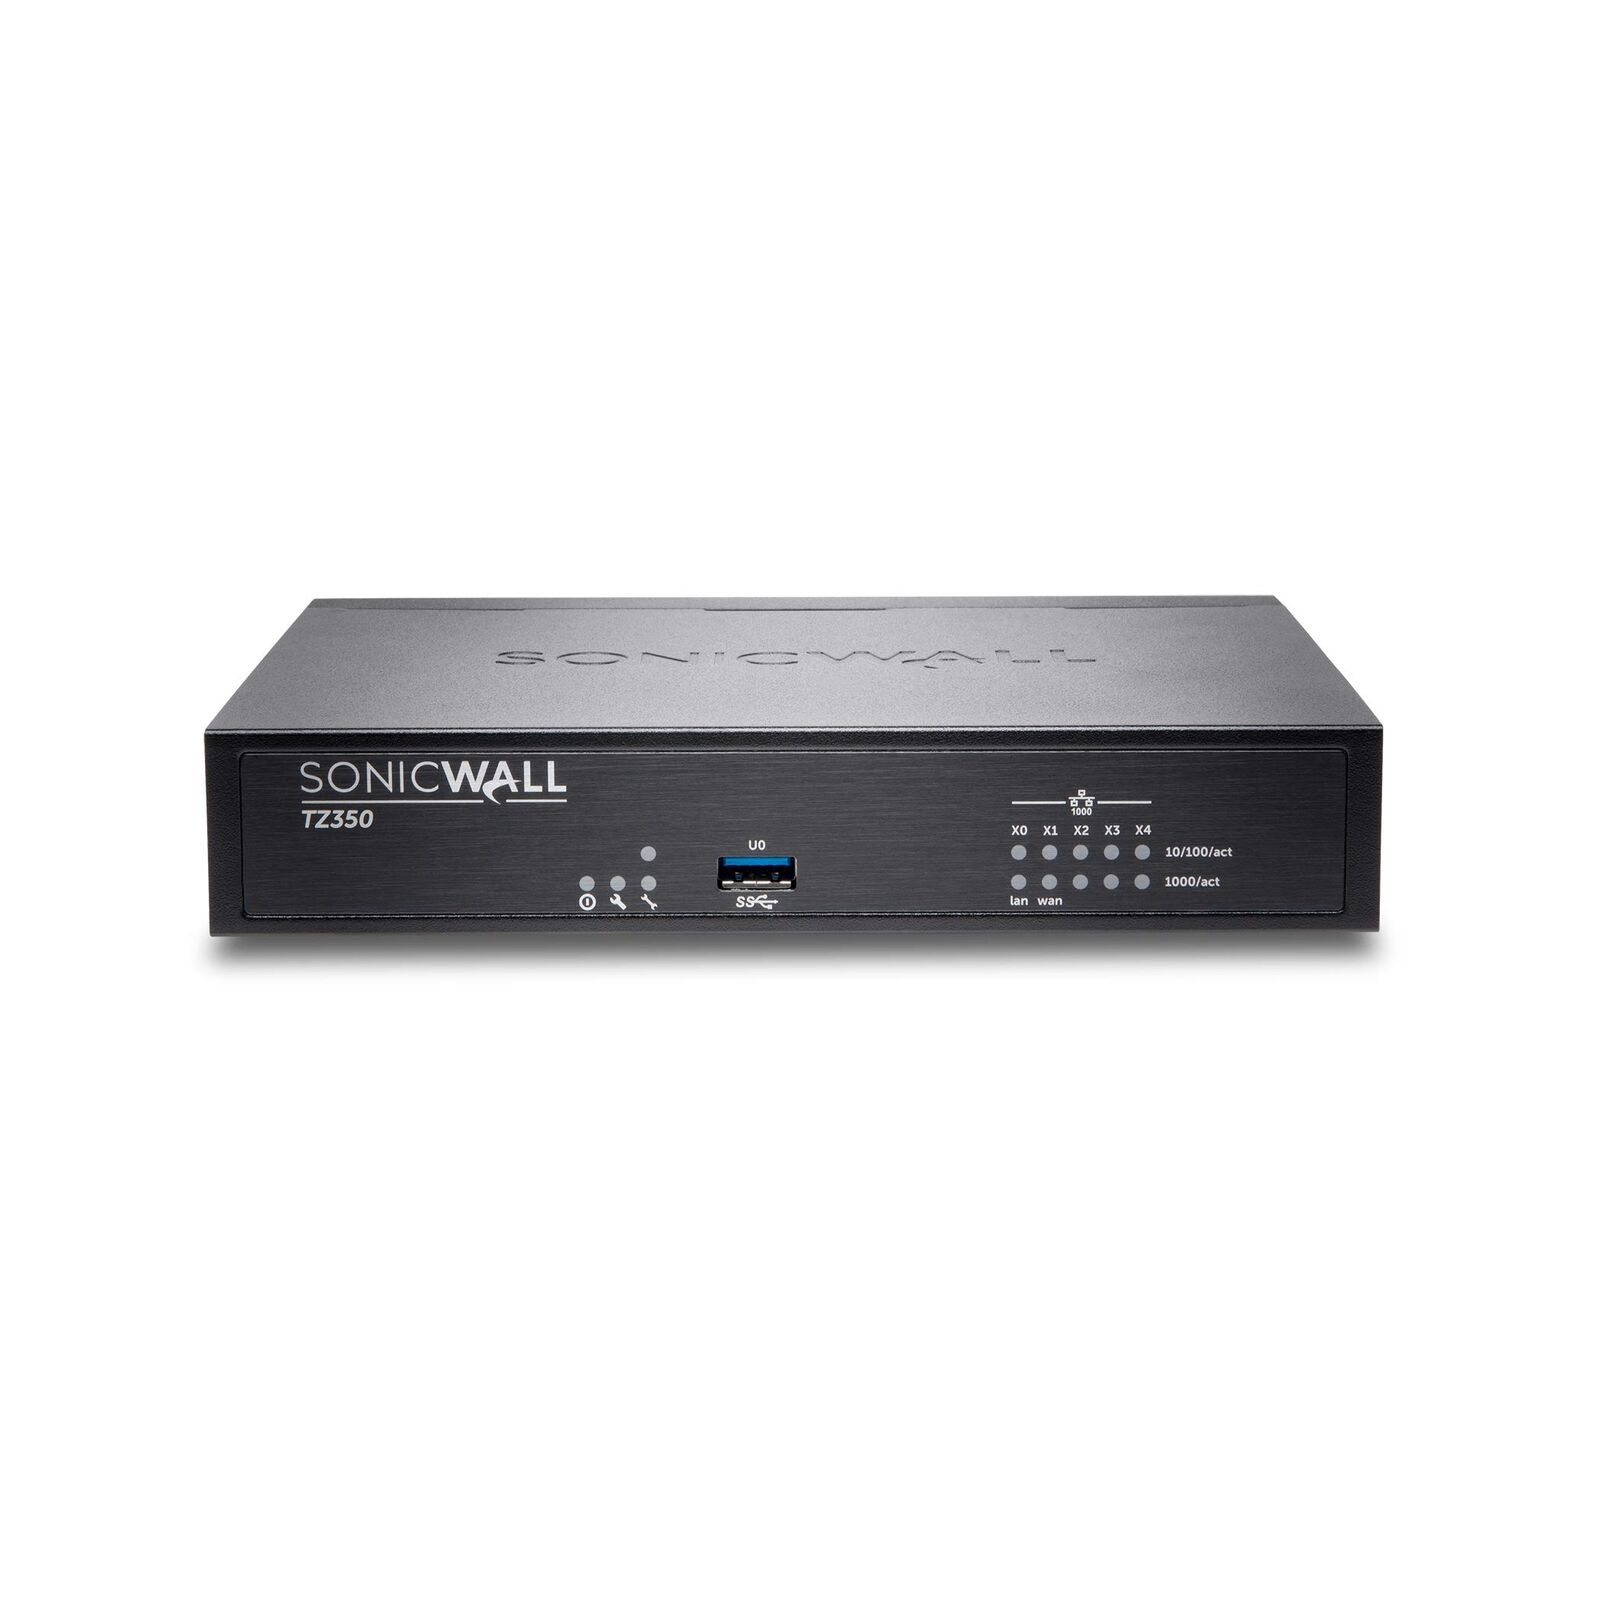 SonicWall TZ350 Network Security Appliance 02-SSC-0942 1.61 pounds